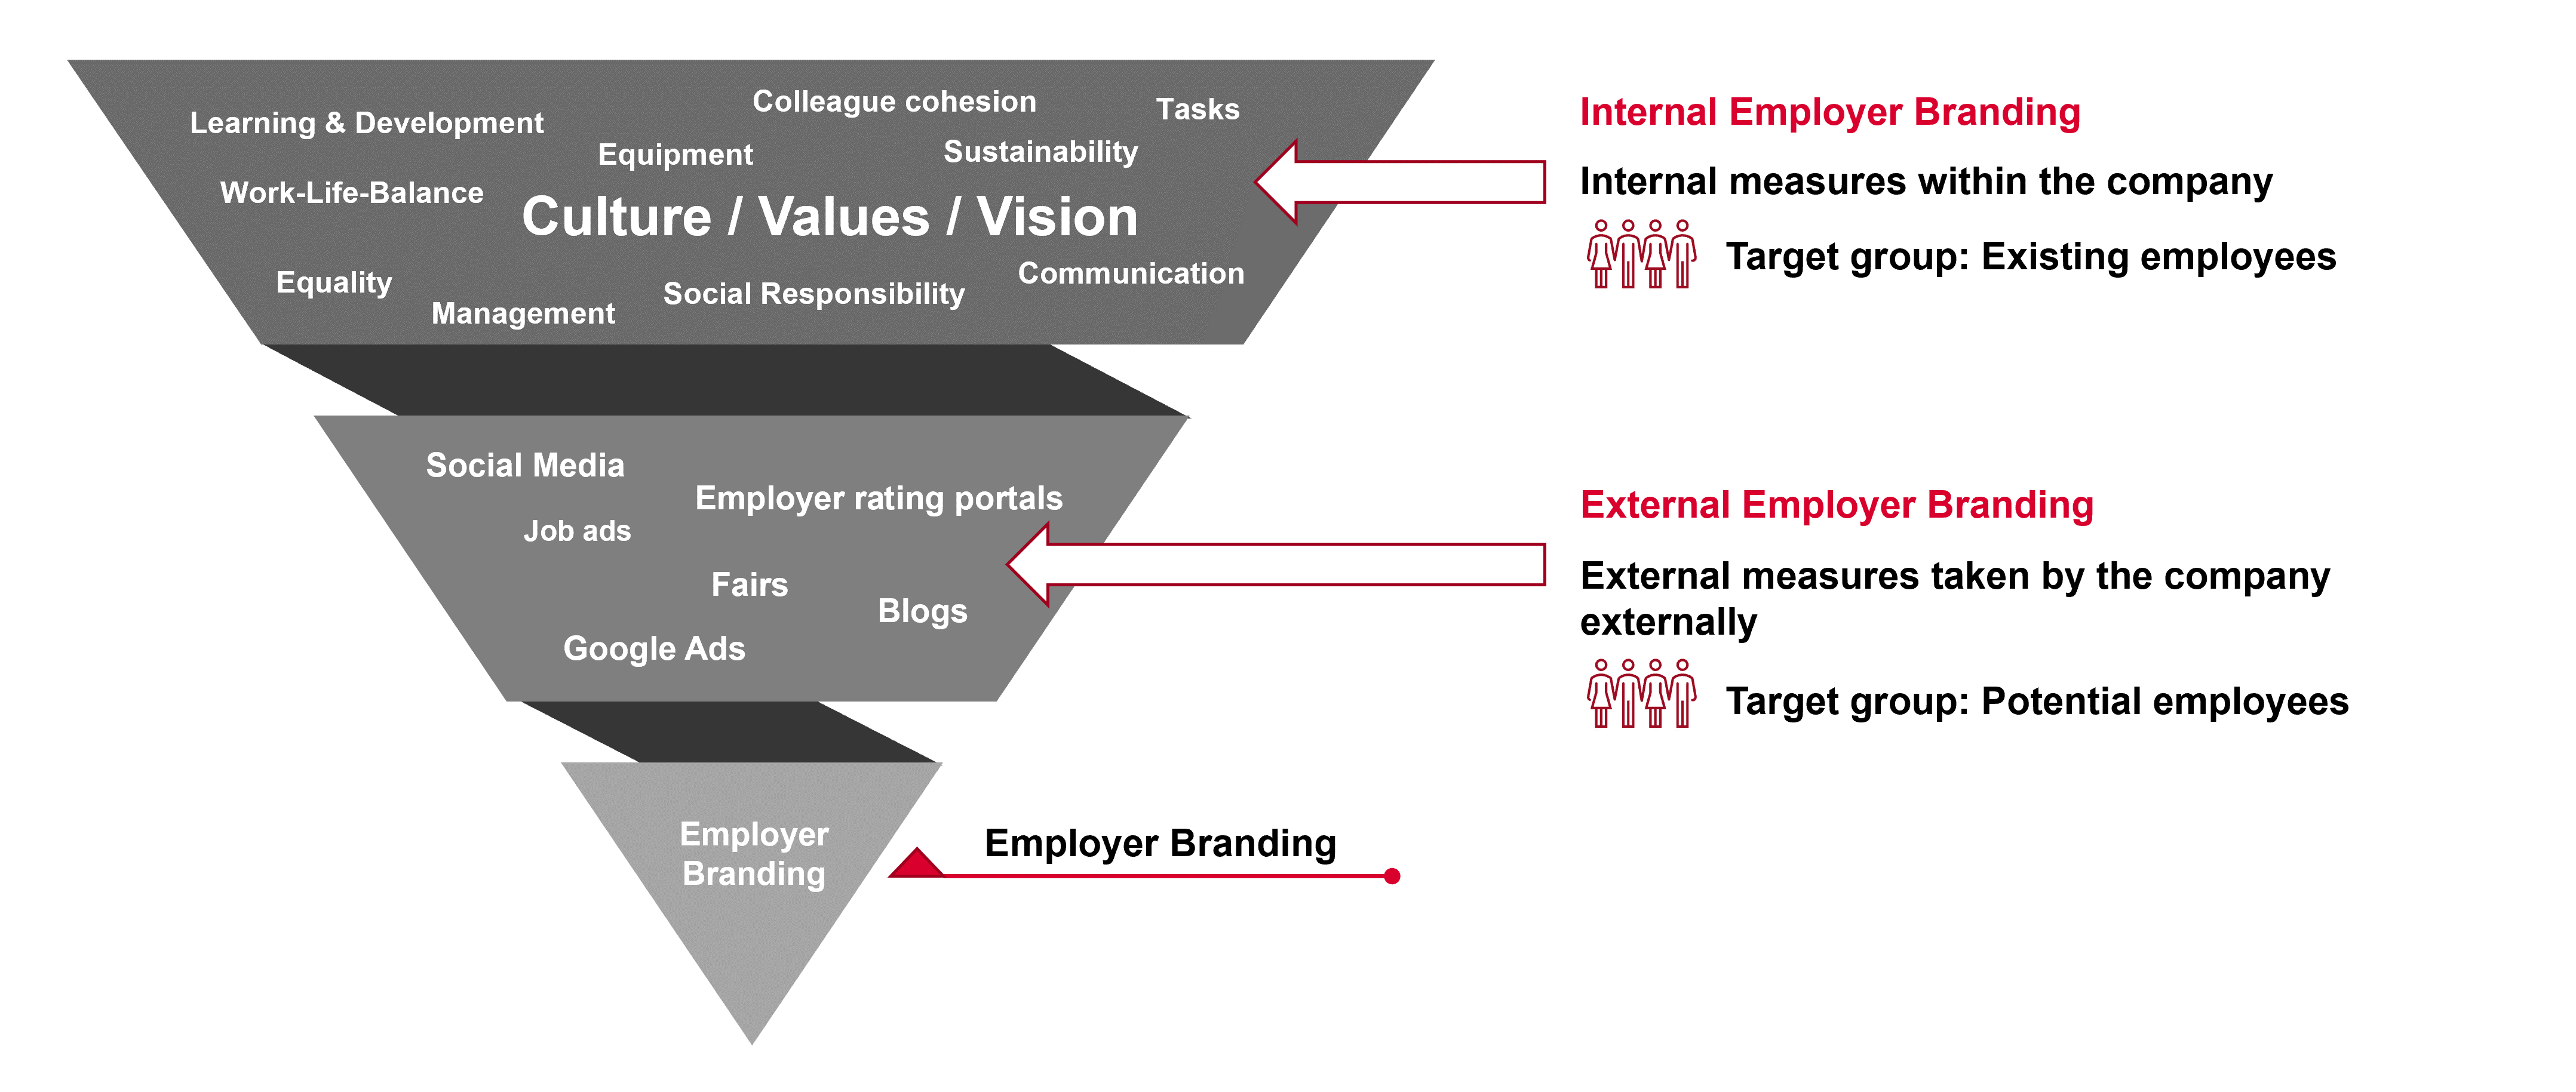 Structure and content of employer branding - internal employer branding and external employer branding